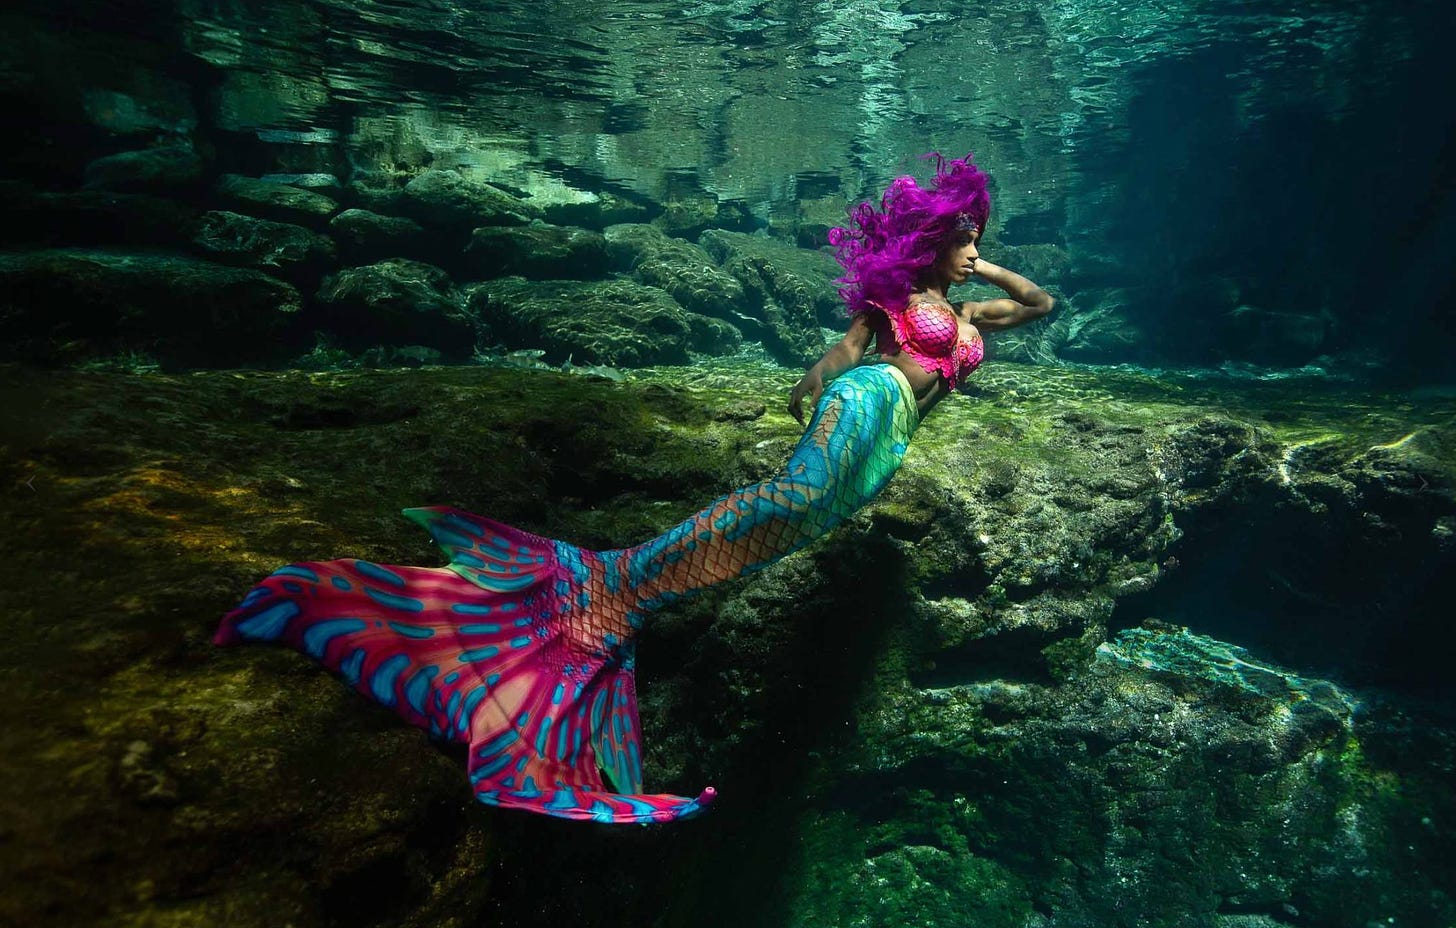 A person dressed as a mermaid underwater with full tail!